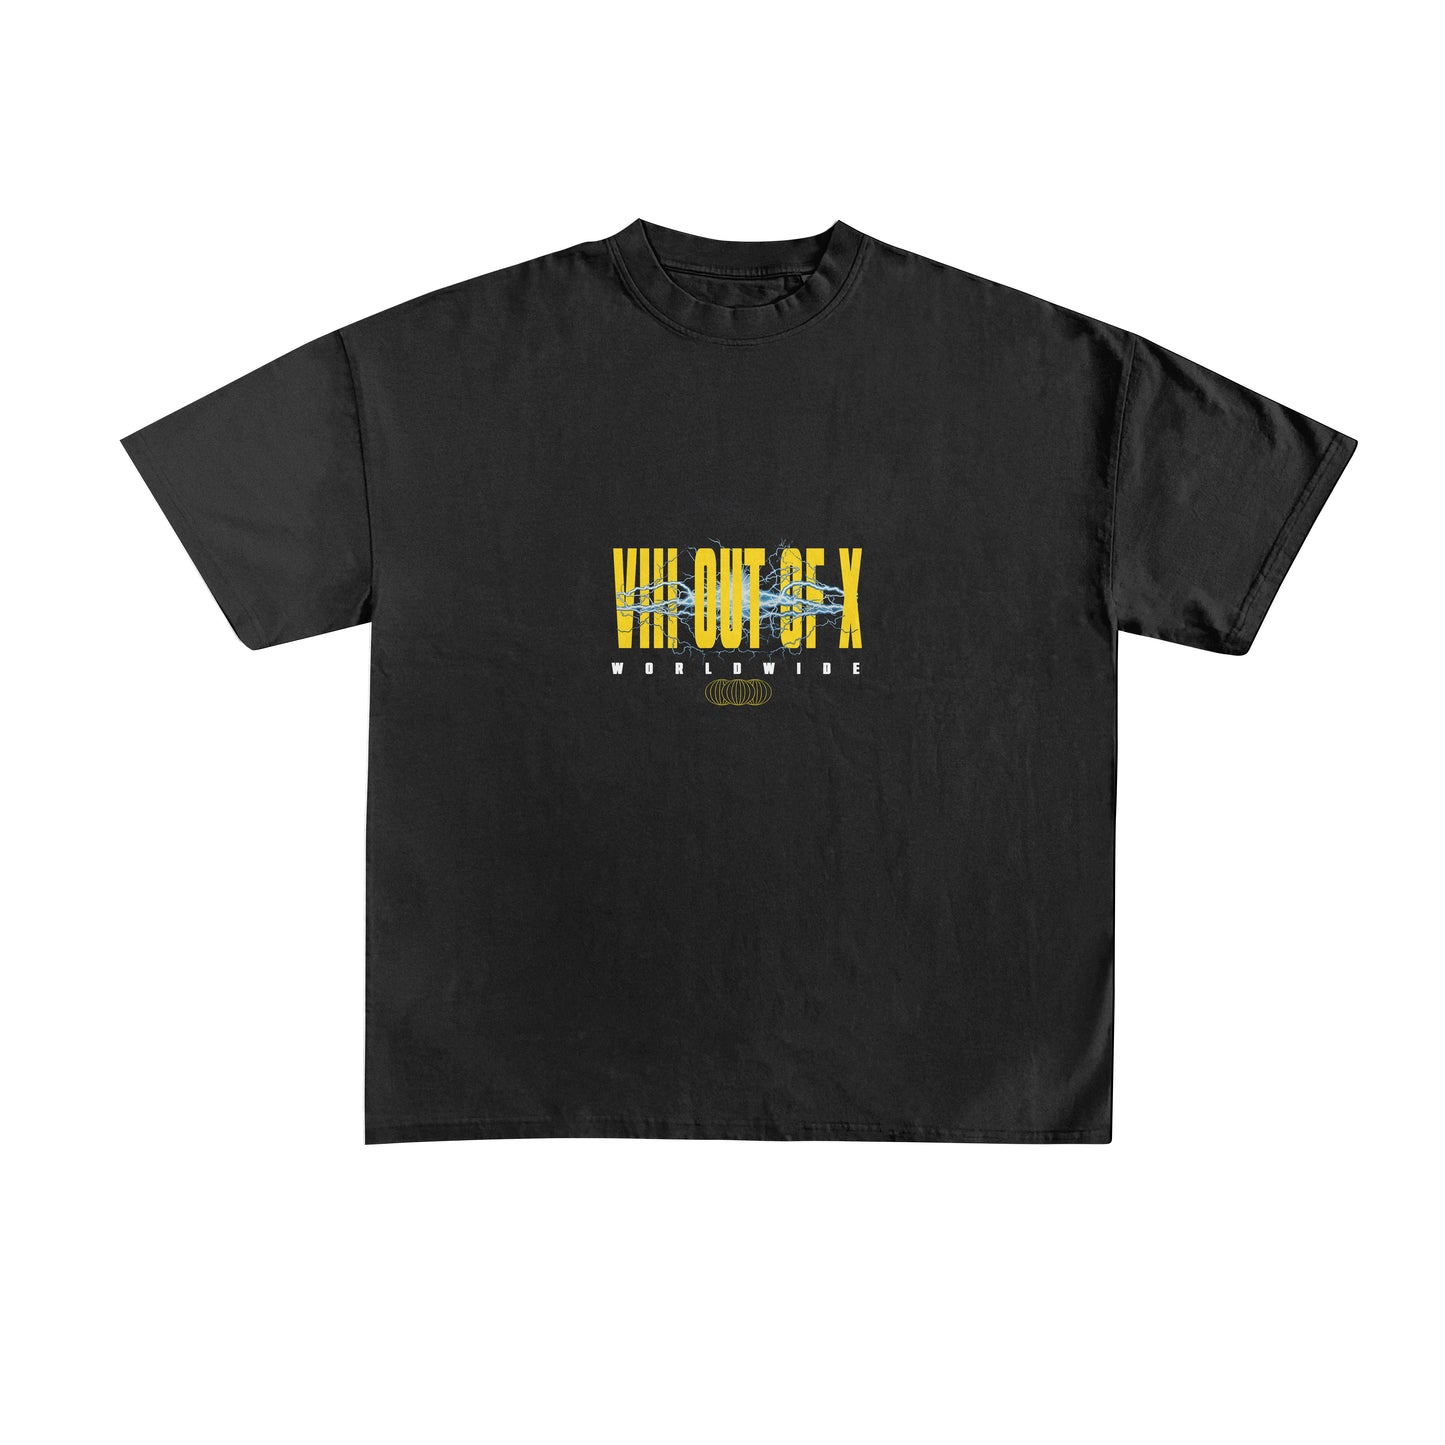 *PRE-ORDER* VIII Out Of X "Blessings" T-Shirt (Black)